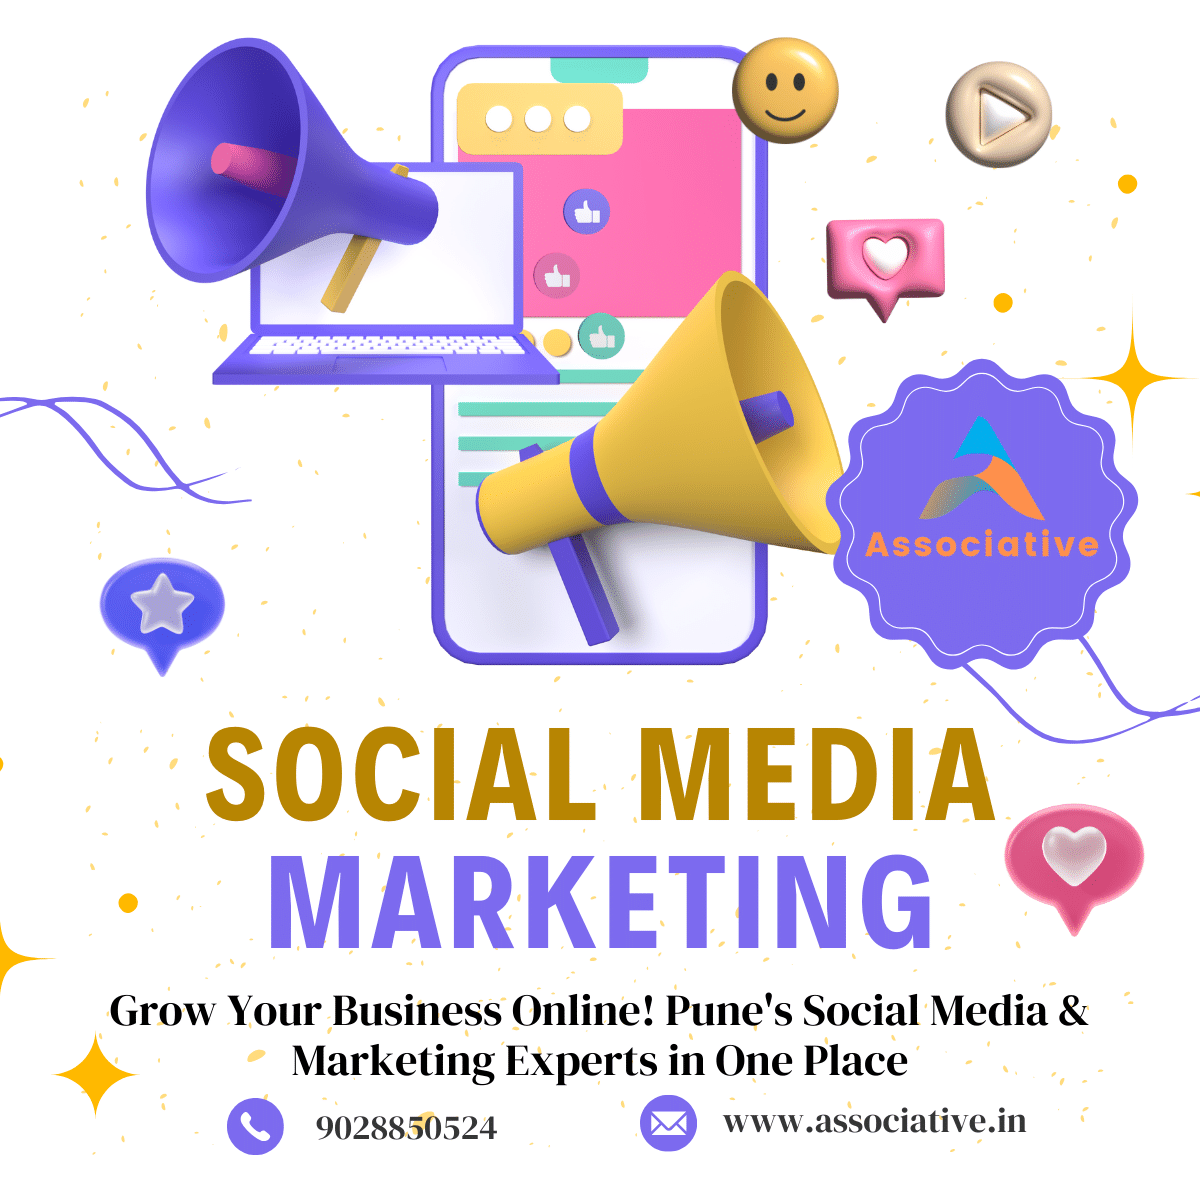 Grow Your Business Online! Pune's Social Media & Marketing Experts in One Place